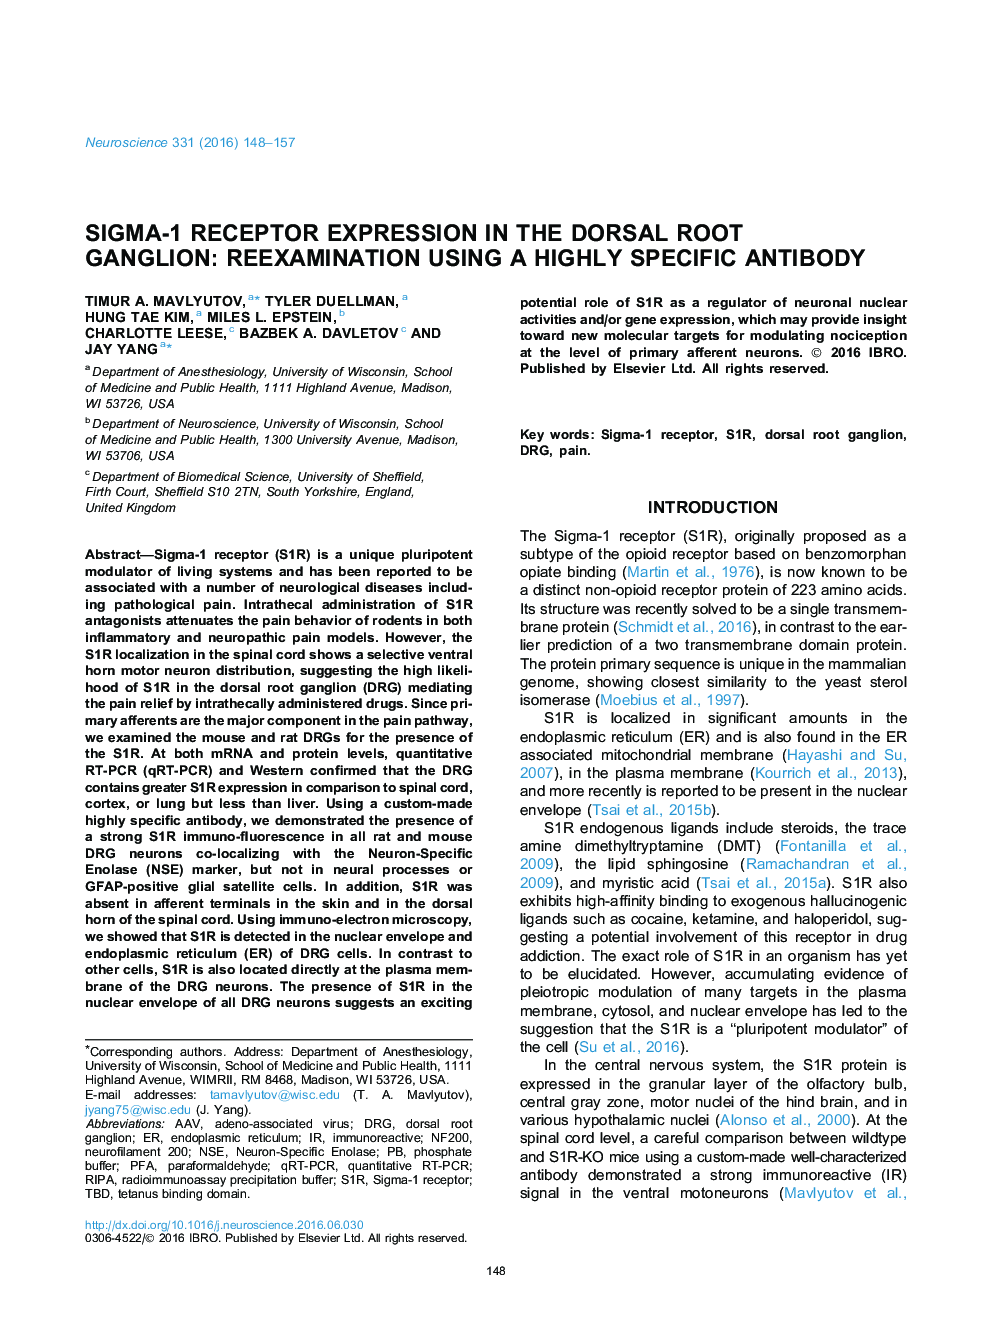 Sigma-1 receptor expression in the dorsal root ganglion: Reexamination using a highly specific antibody